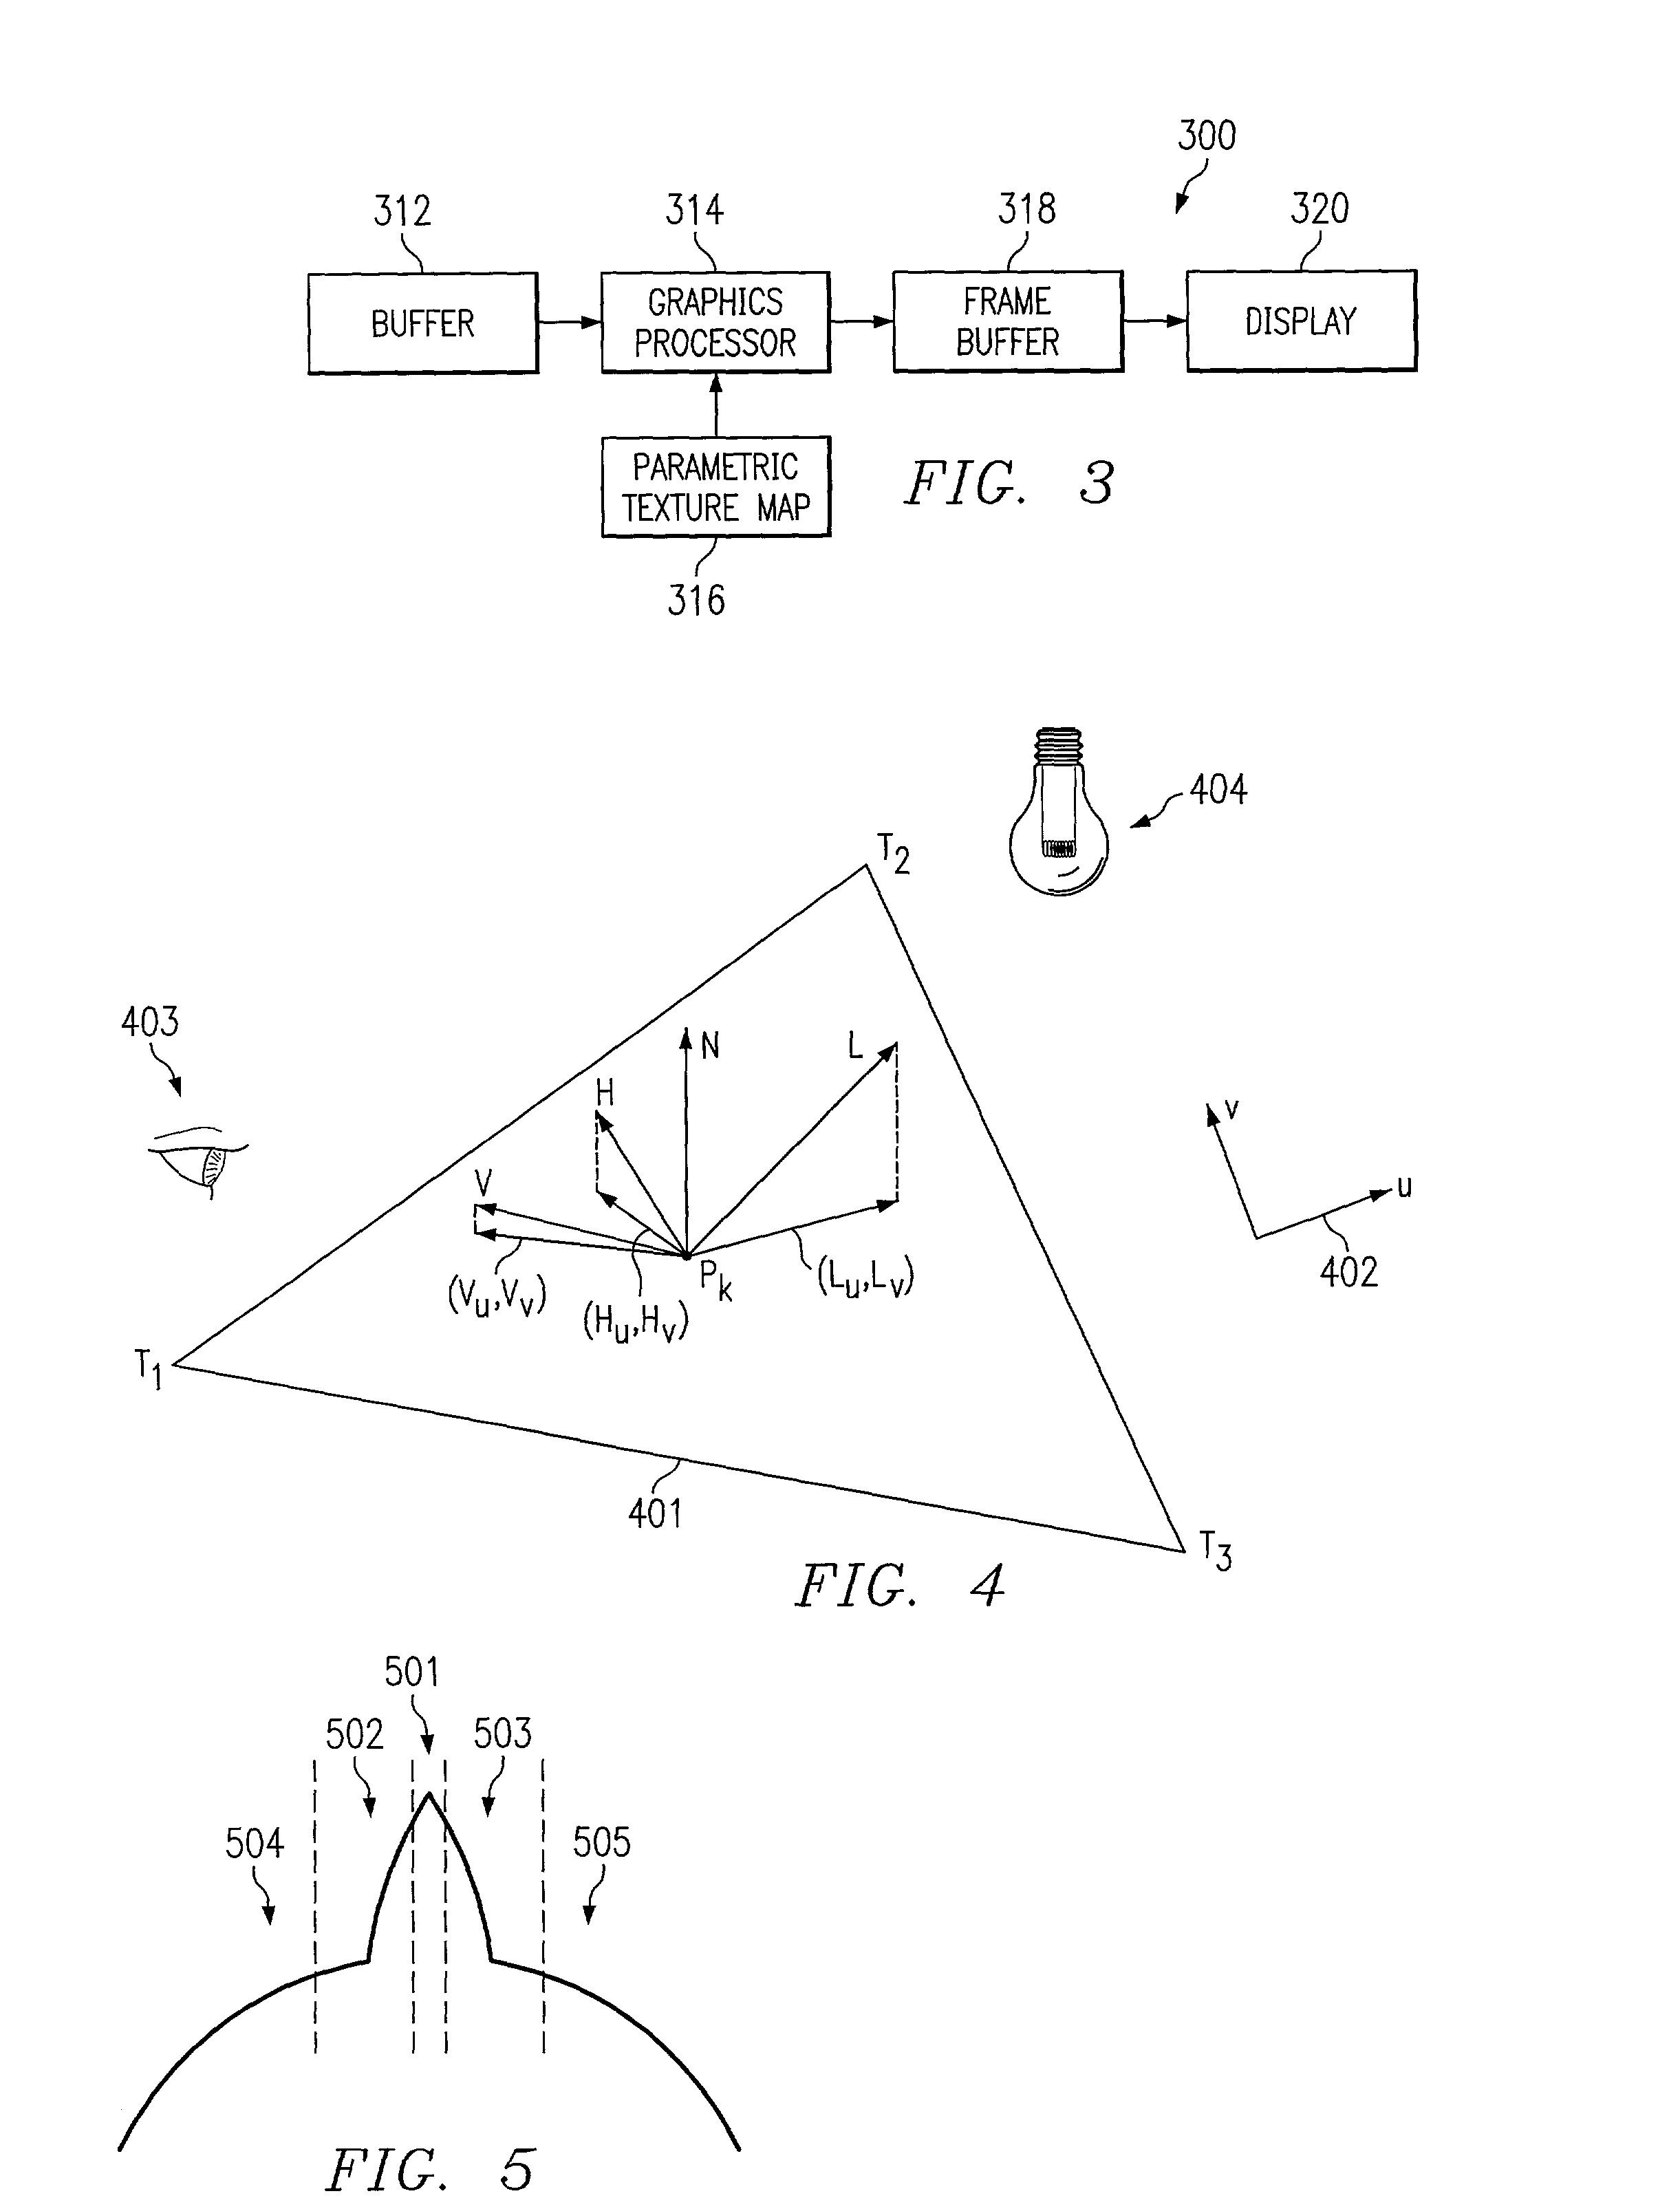 System and method for rendering digital images having surface reflectance properties